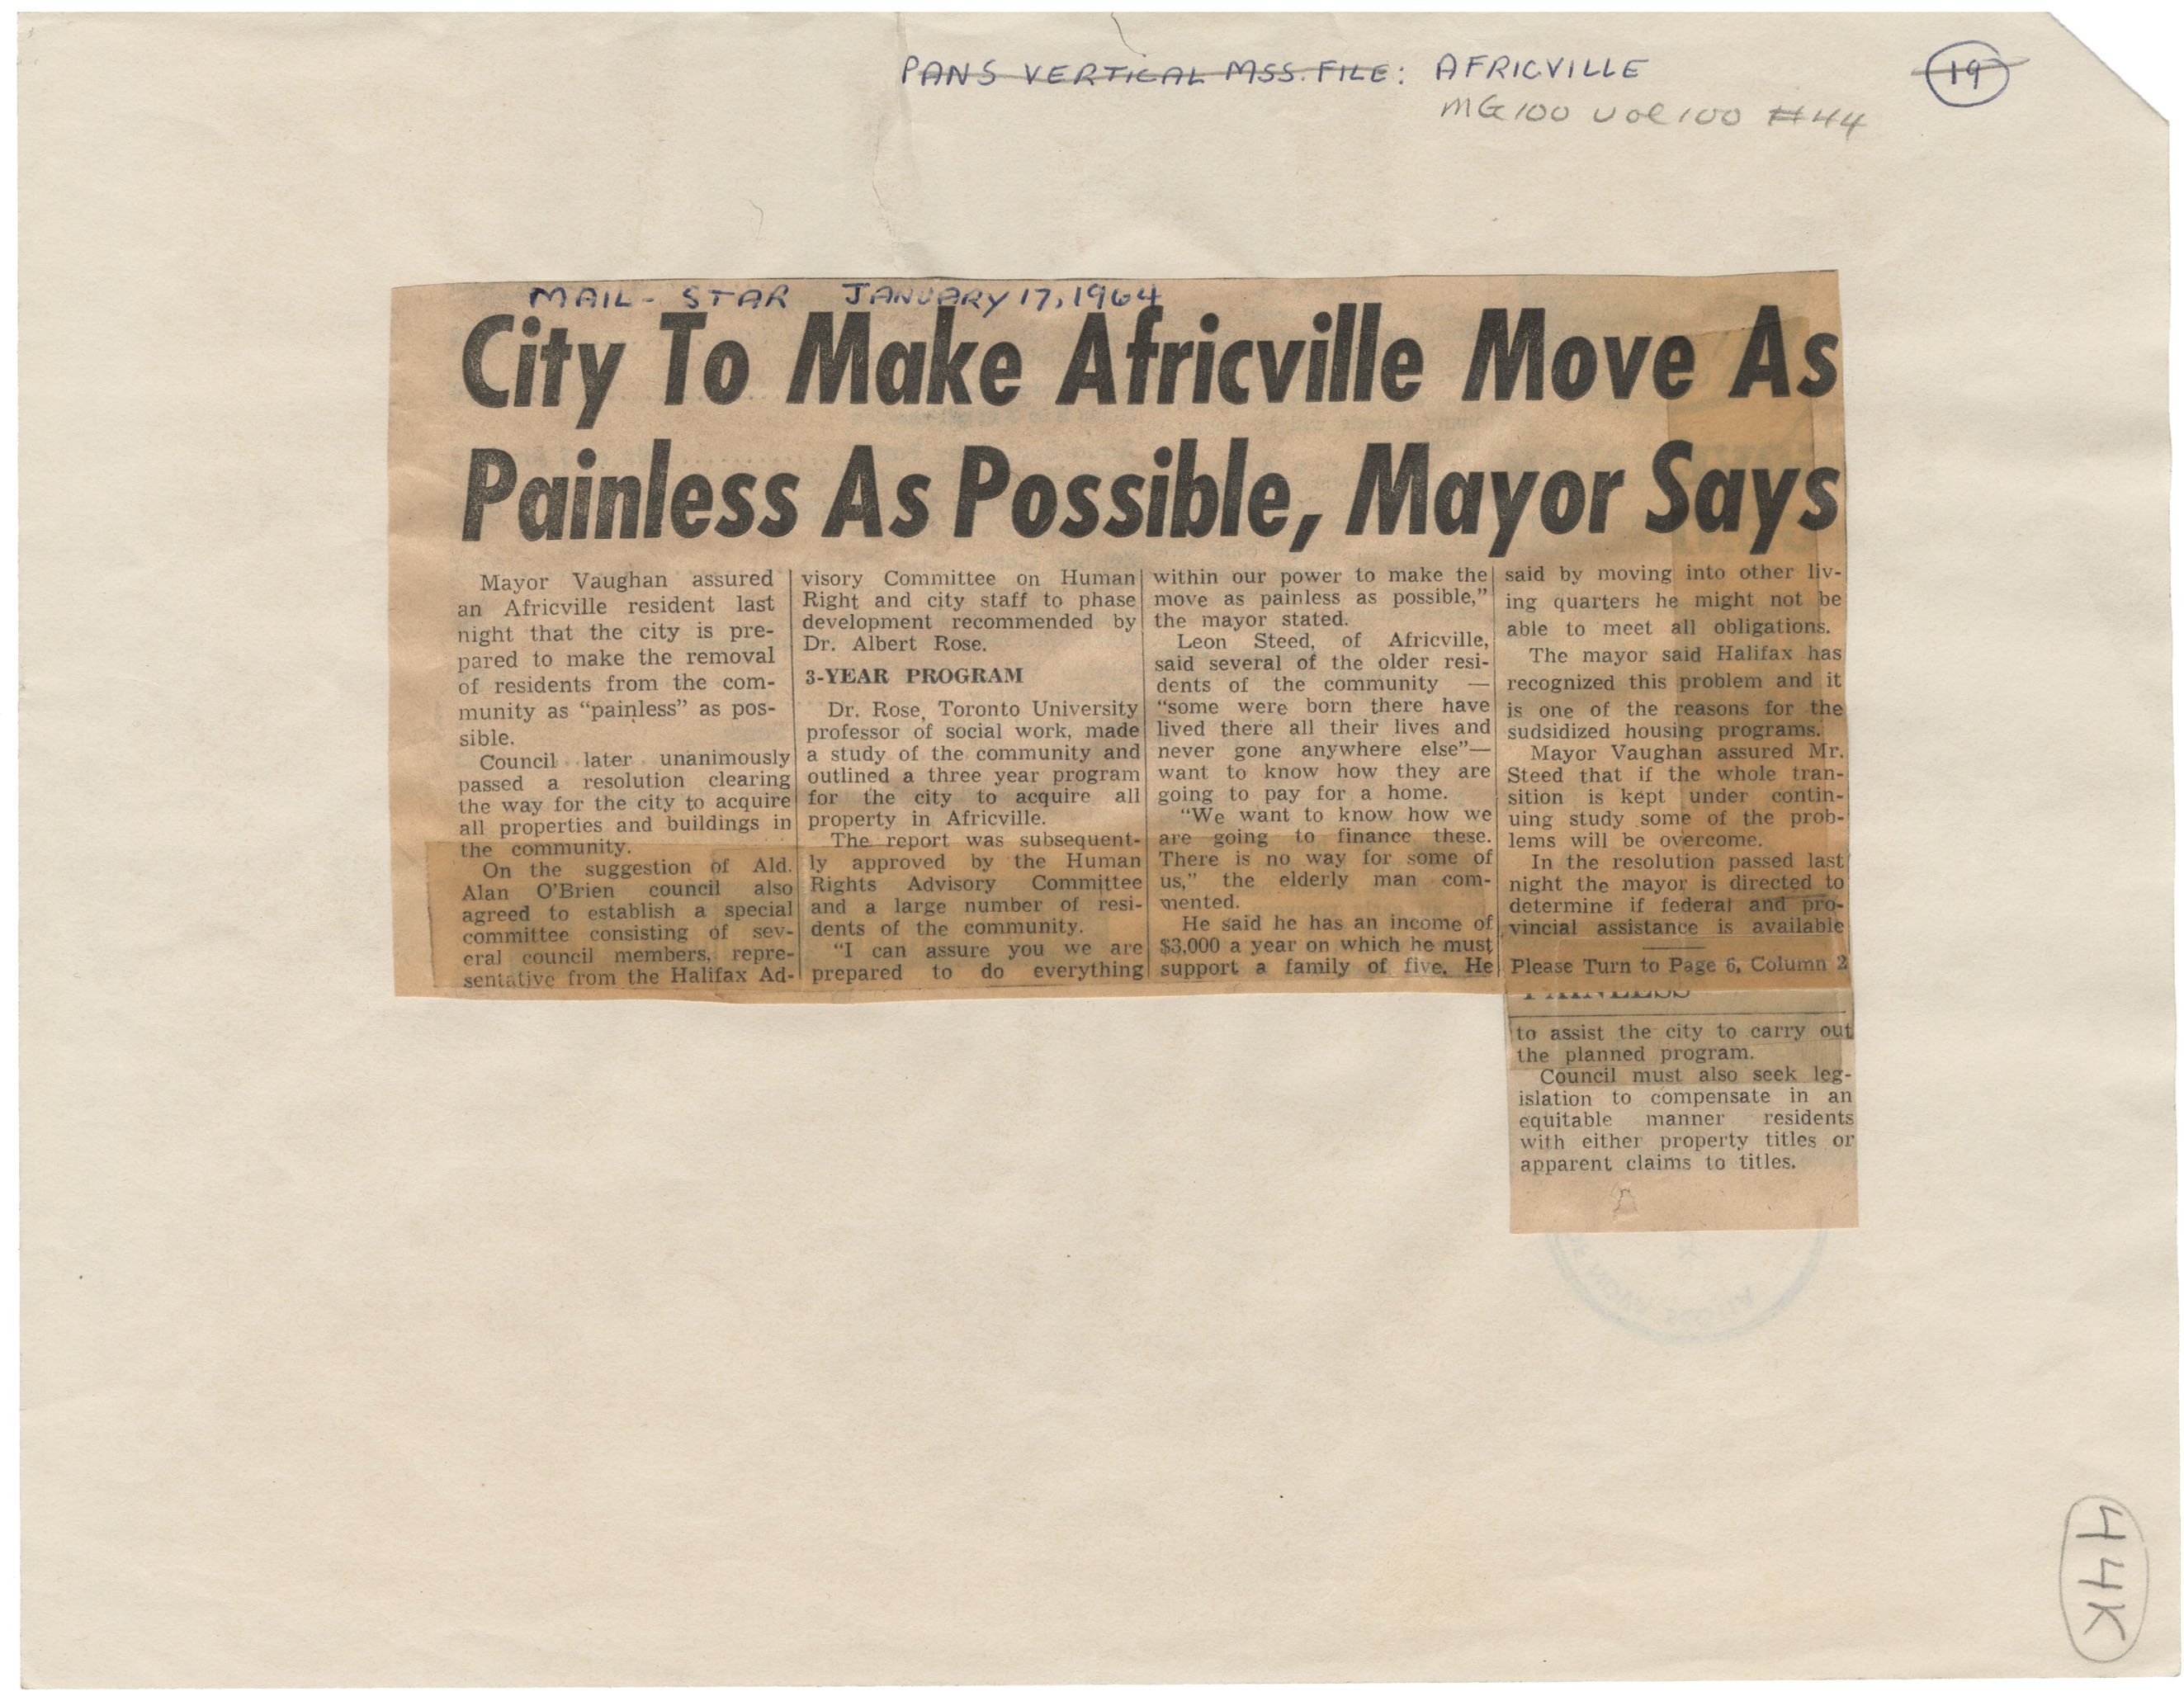 african-heritage : City to Make Africville Move As Painless As Possible, Mayor Says, Mail Star excerpt